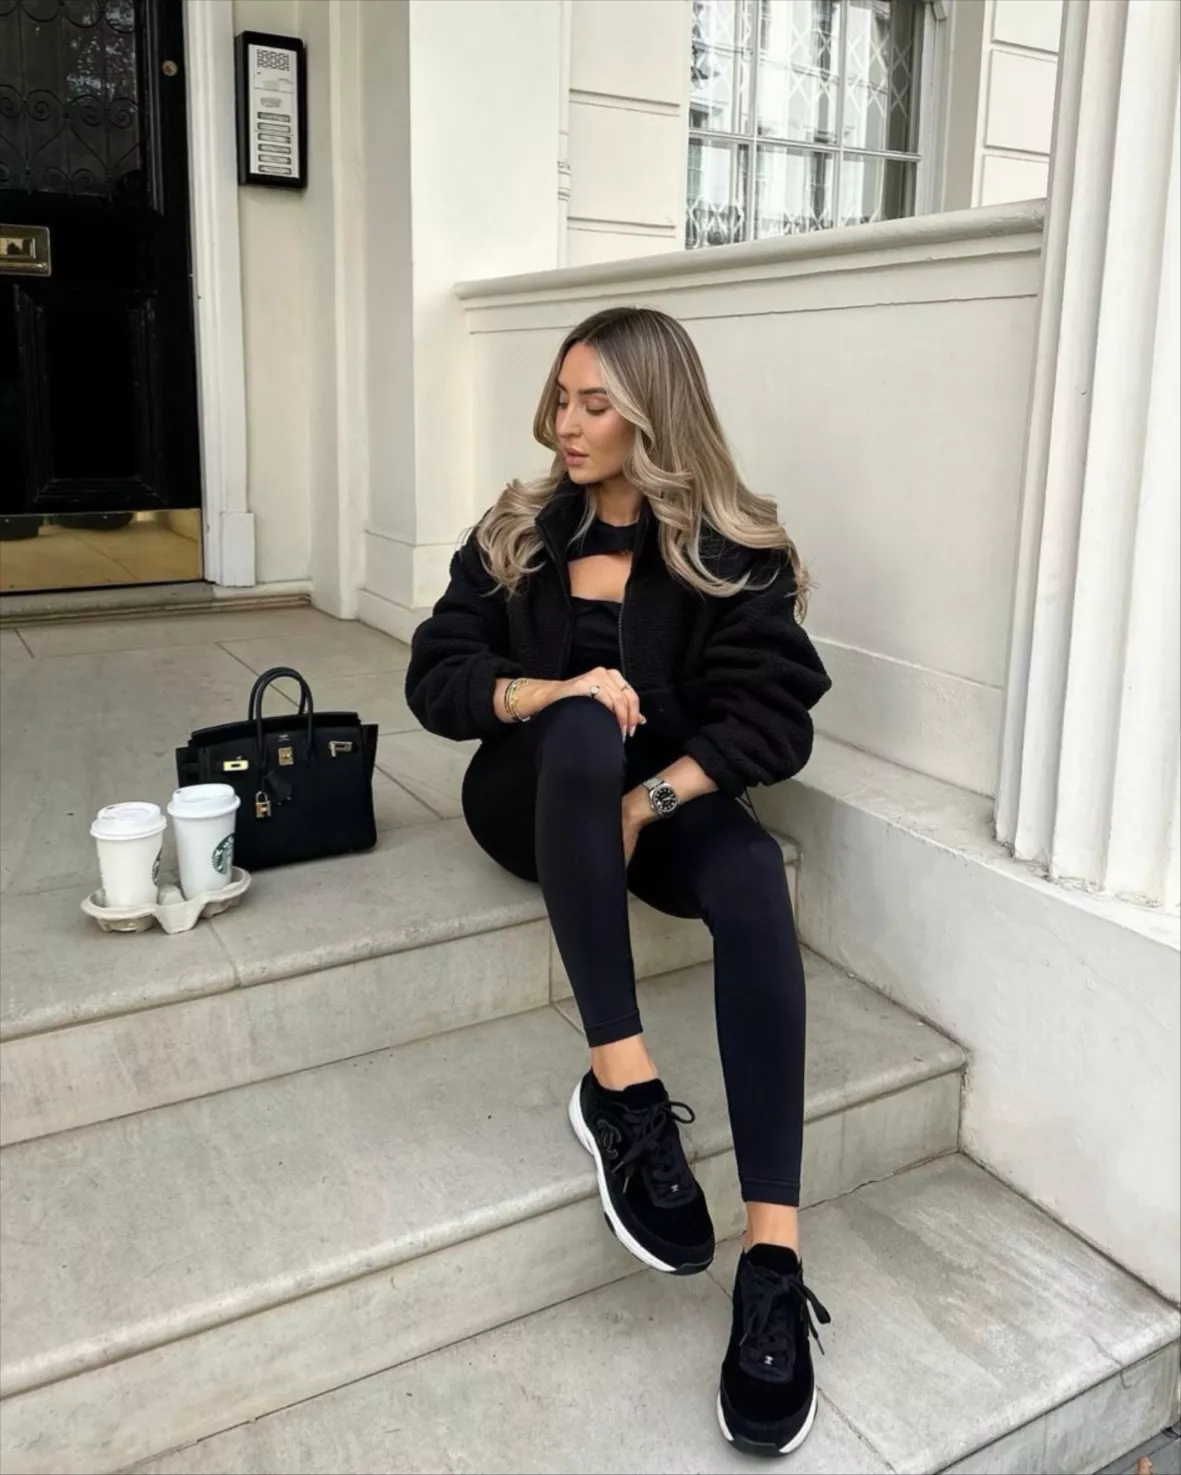 In The Style - NUDES ARE IN 👀 How unreal does this outfit look babes,  @freyakillin looks incredible in our @lornaluxe jumper and suede leggings,  we are OBSESSED 🔥🔥🔥 get the whole